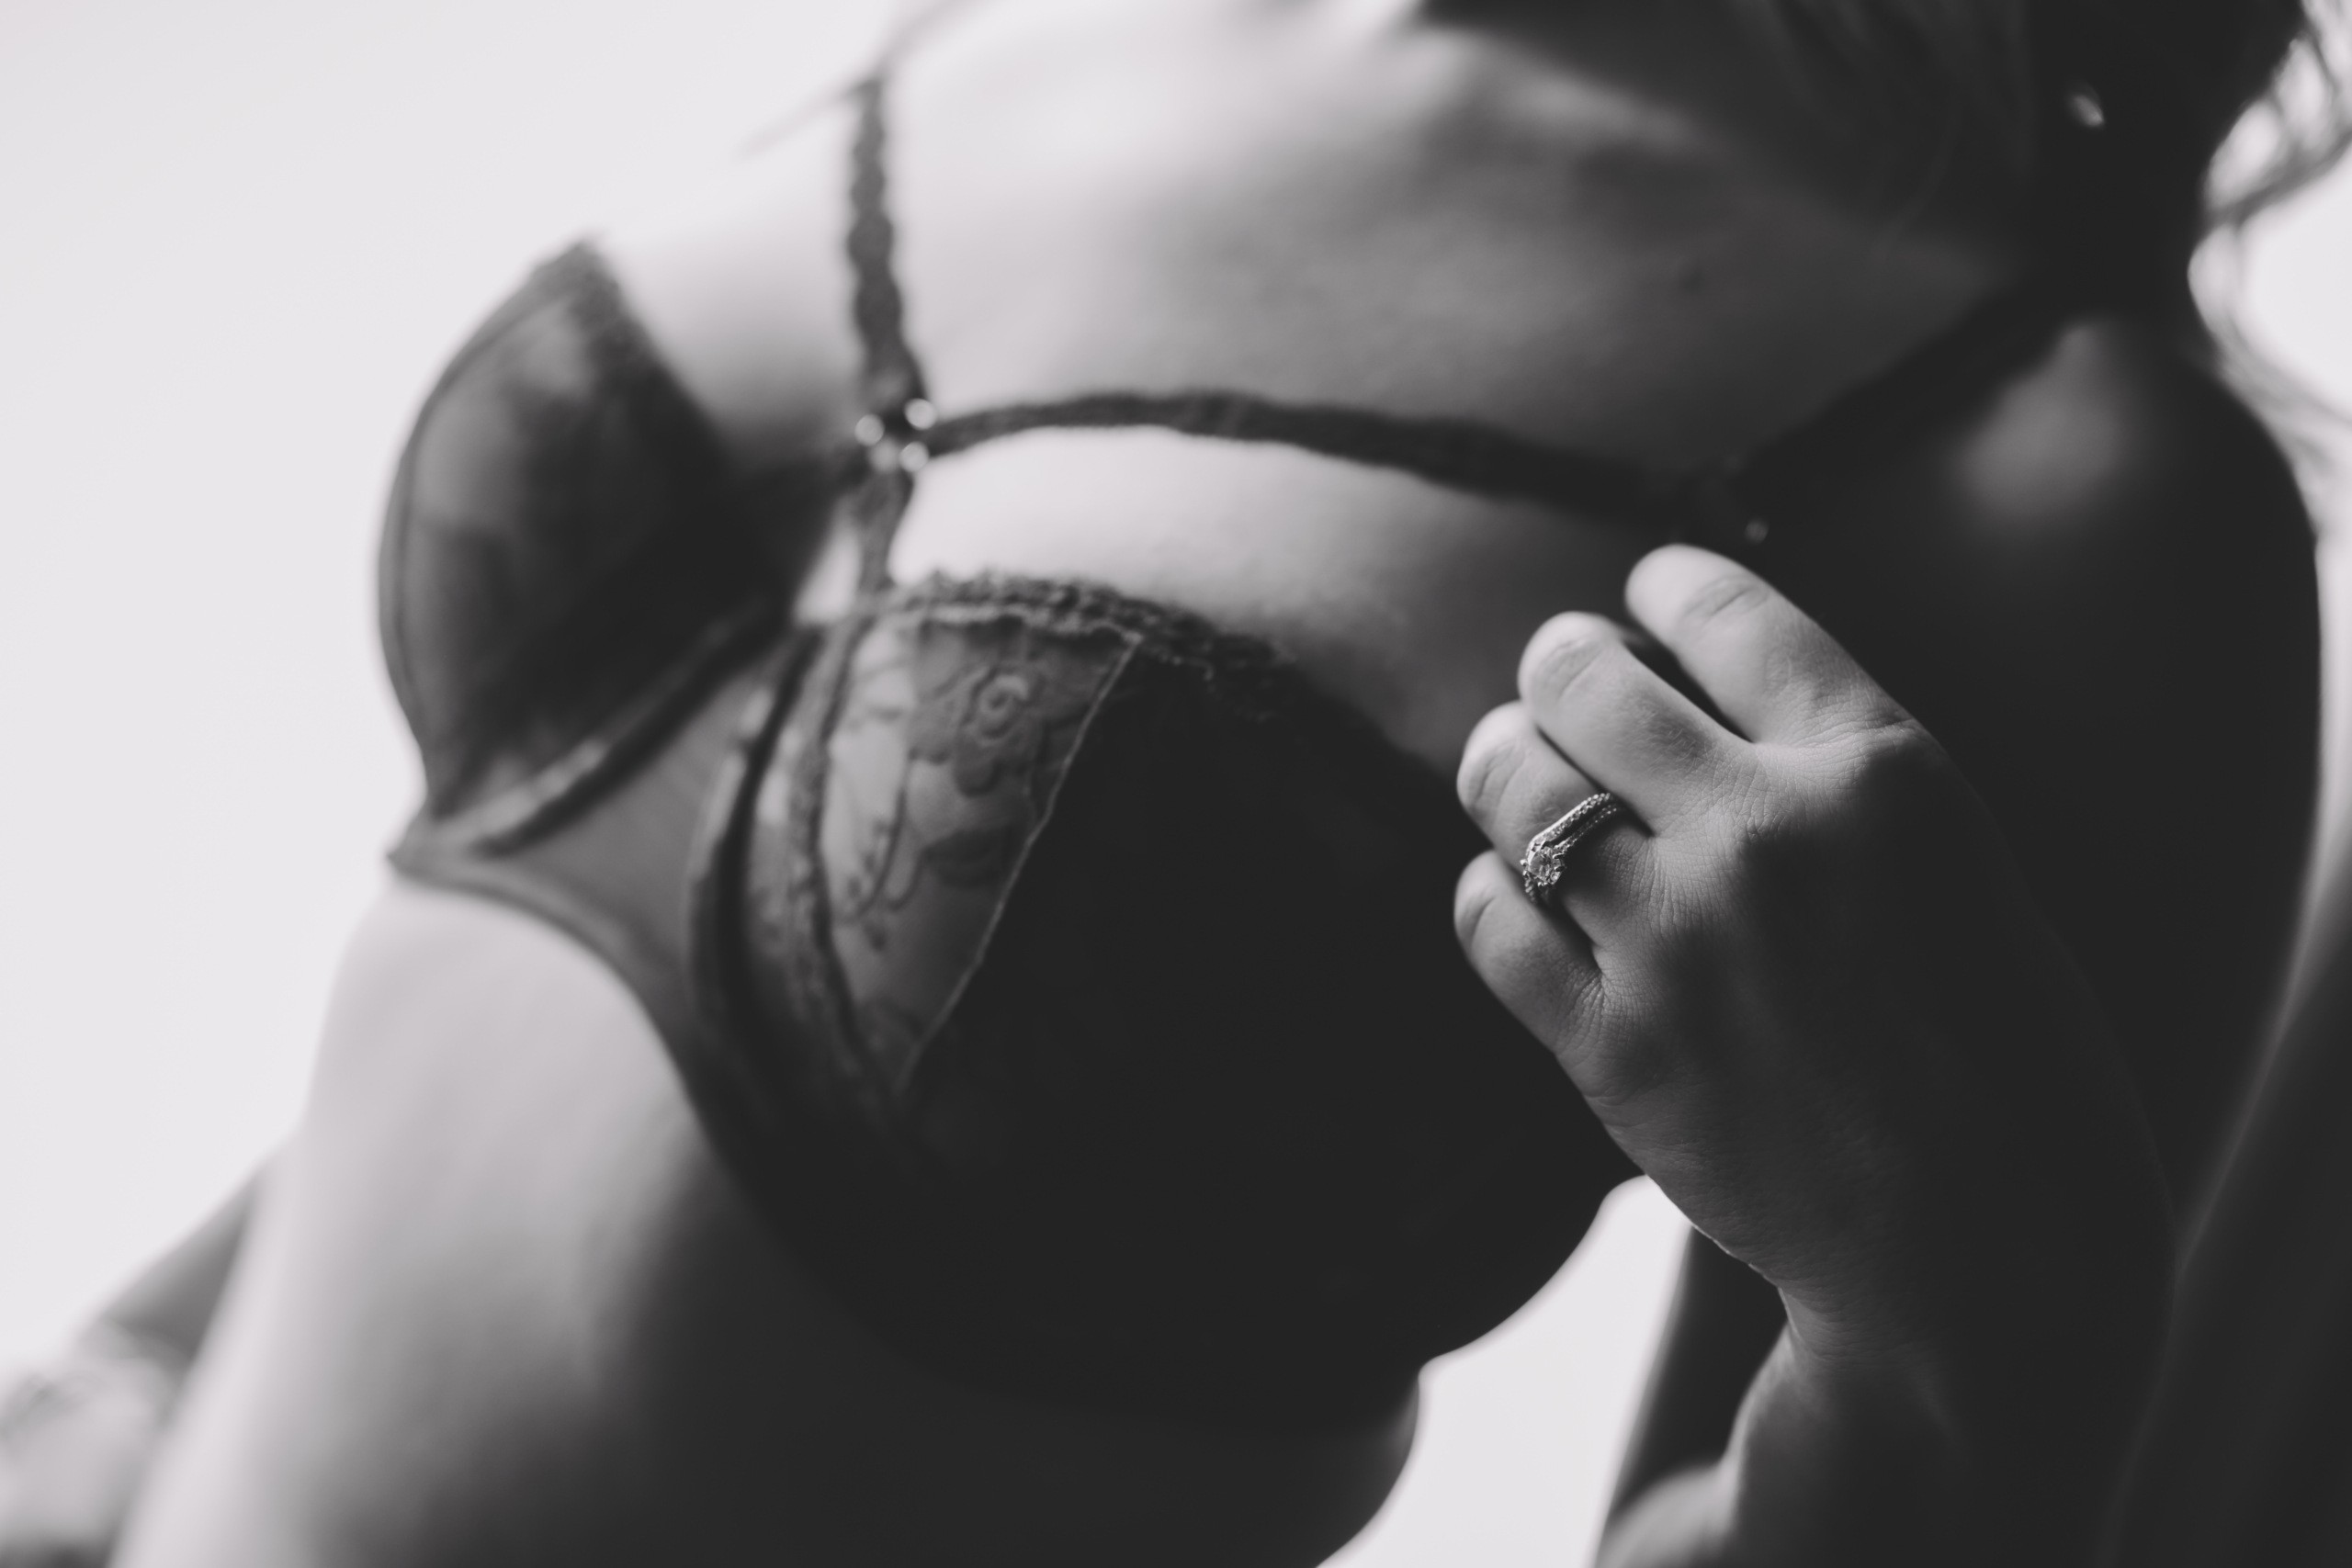 black and white close up of a woman's chest with her left hand and weddings bands in focus